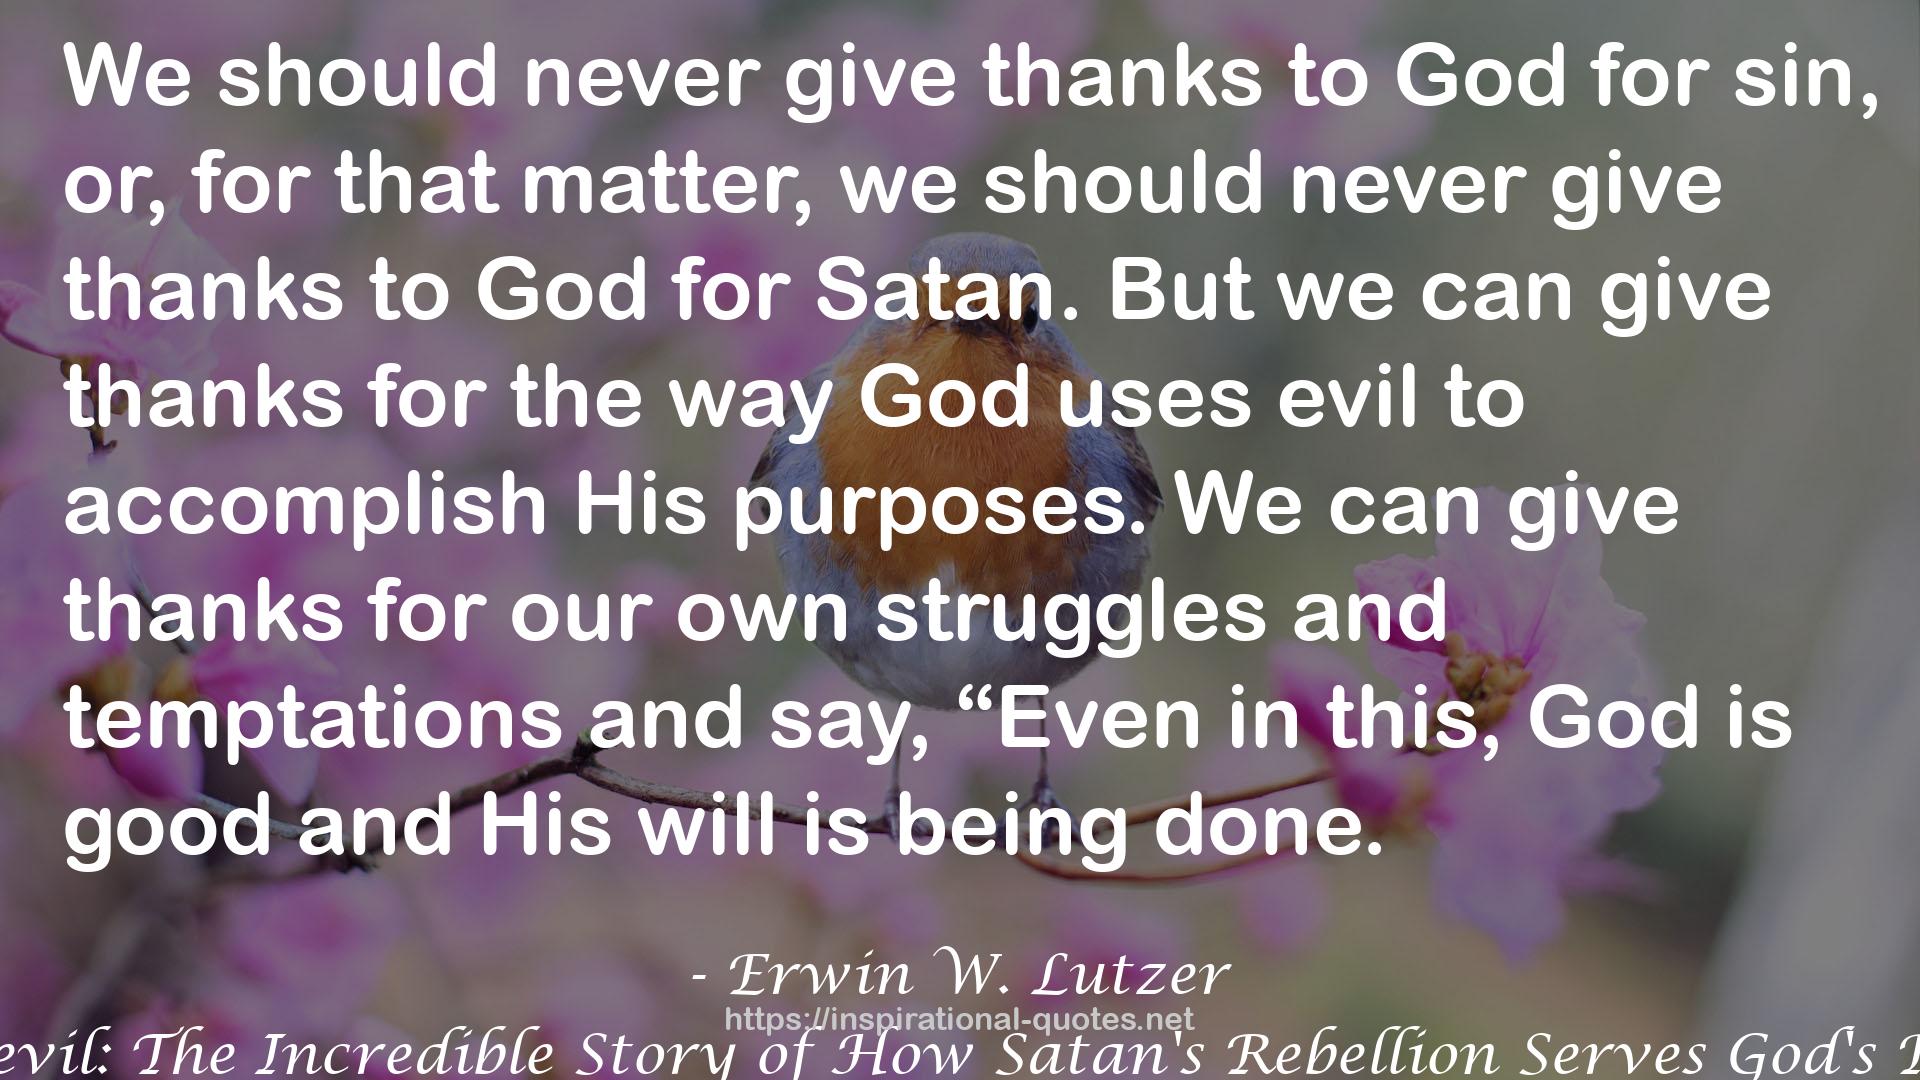 God's Devil: The Incredible Story of How Satan's Rebellion Serves God's Purposes QUOTES